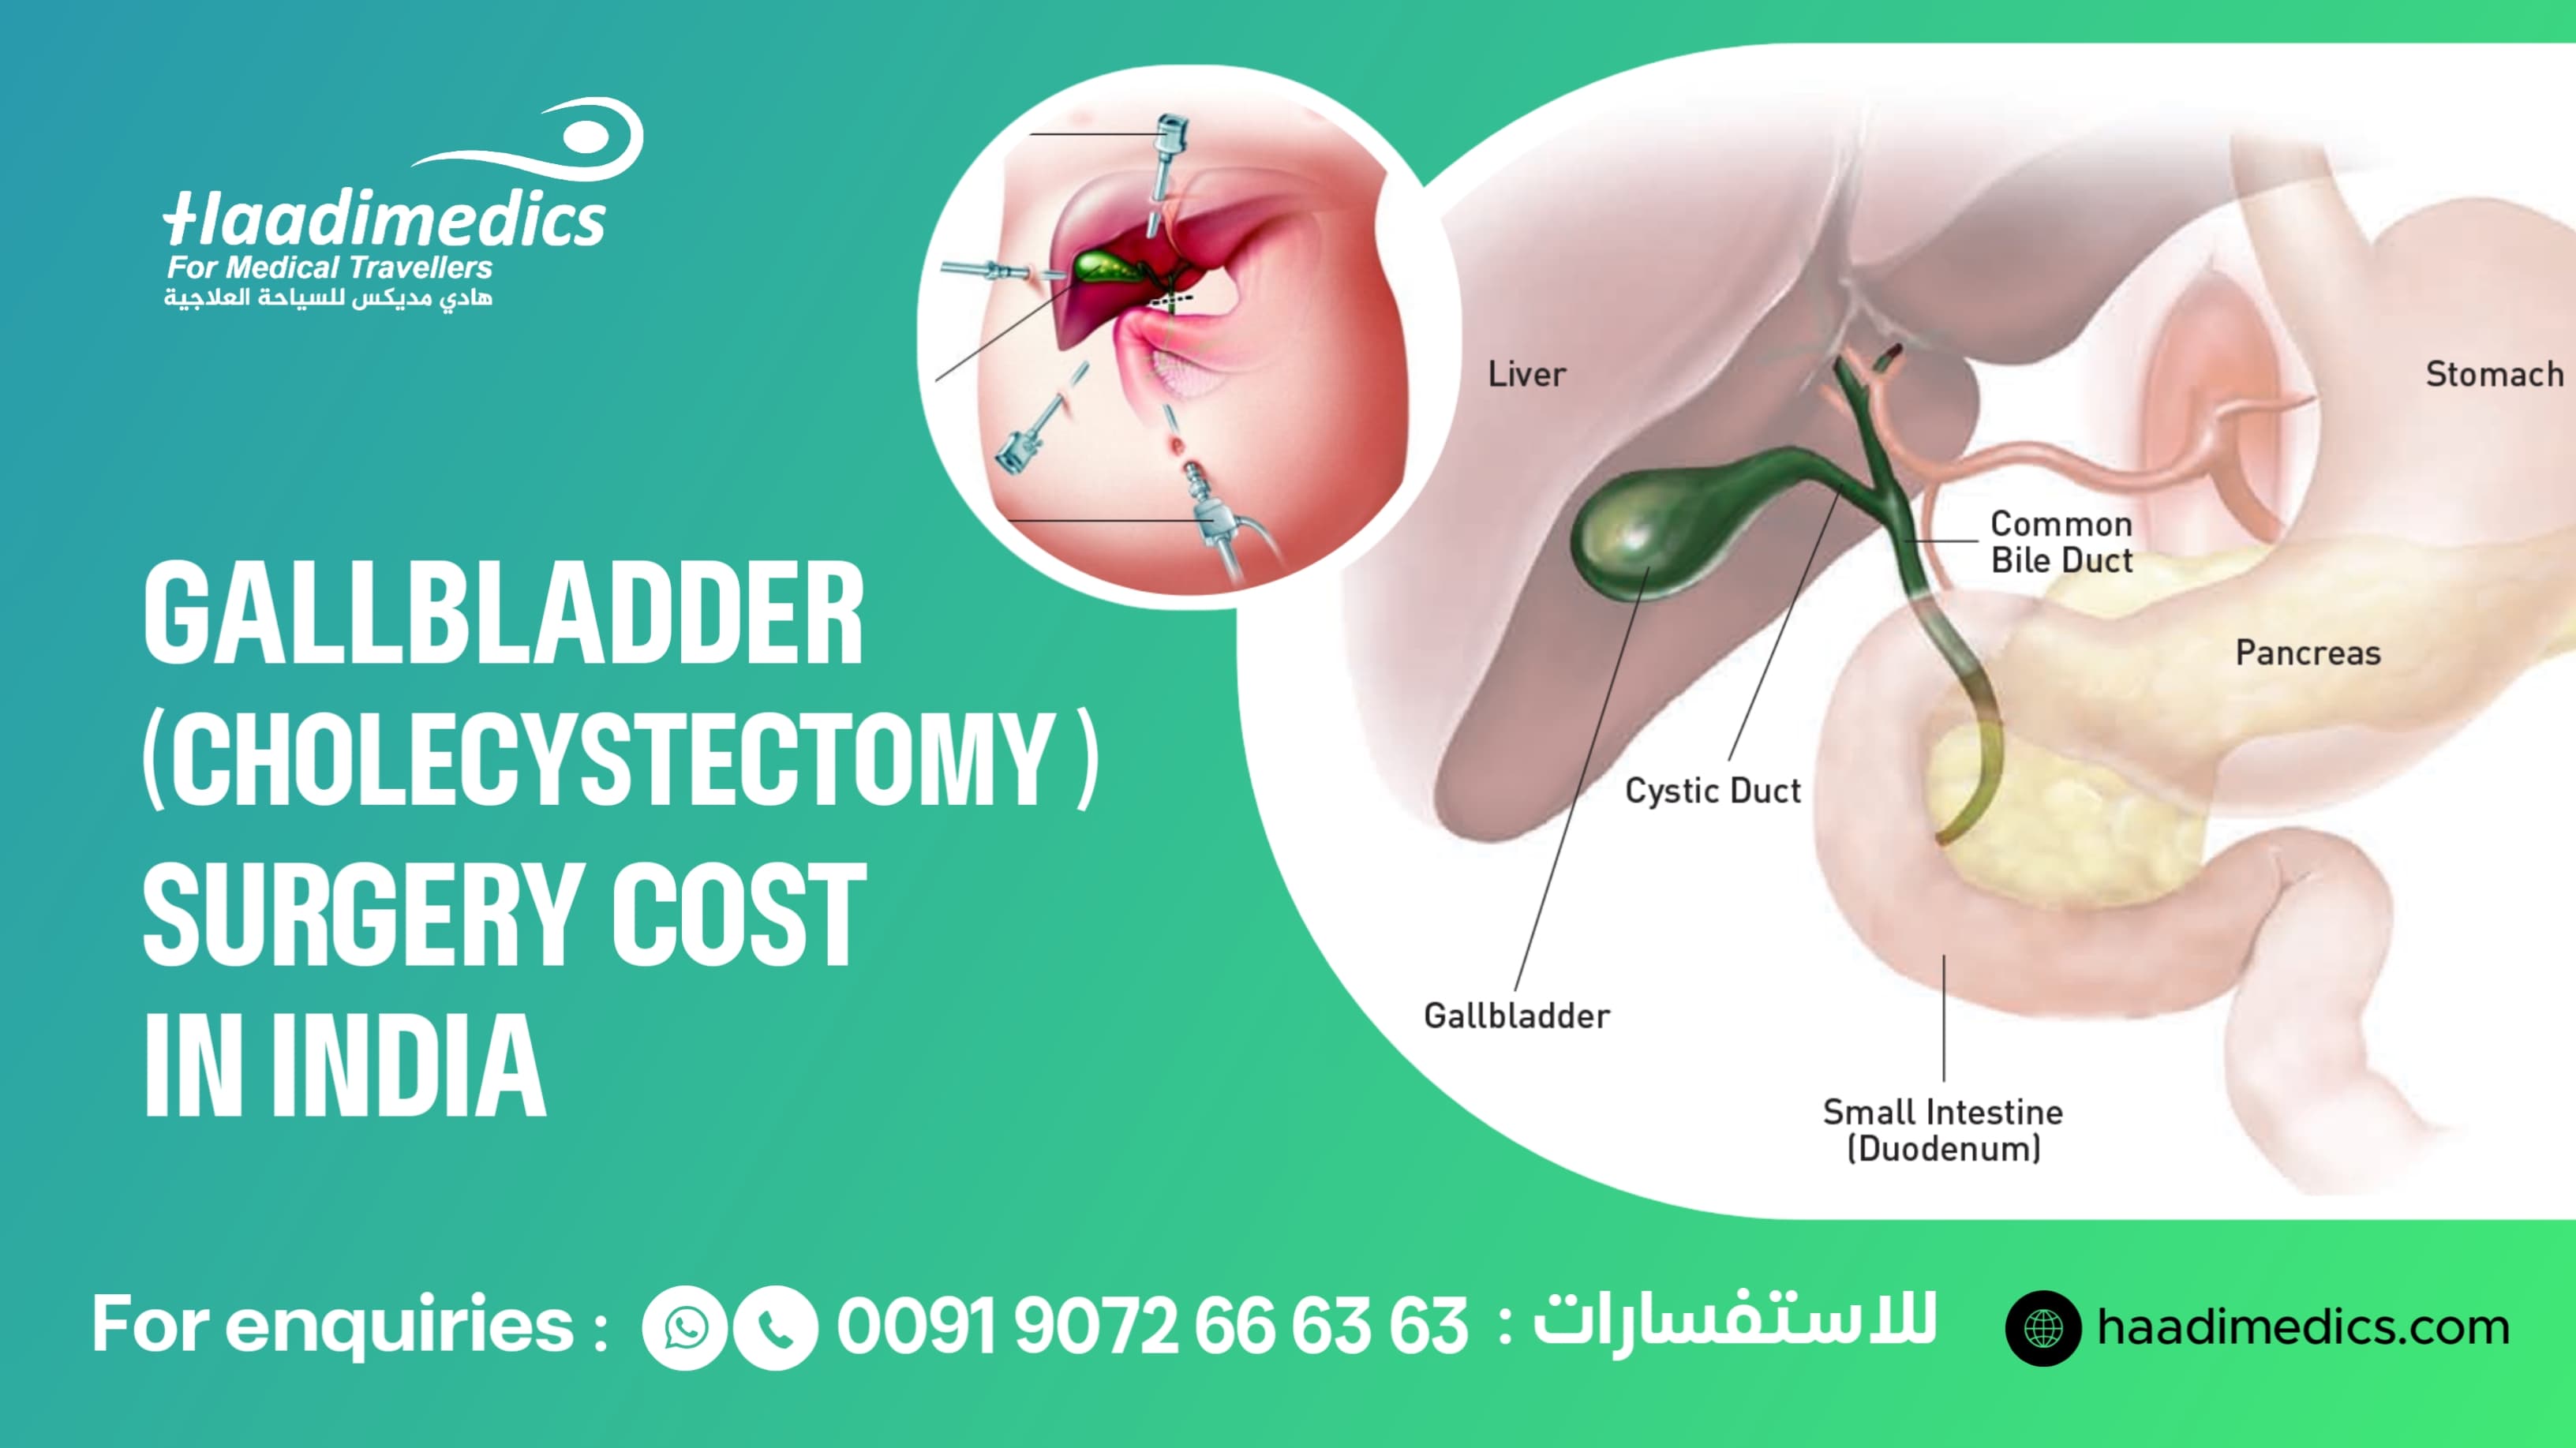 Gallbladder Surgery (Cholecystectomy) Cost in India